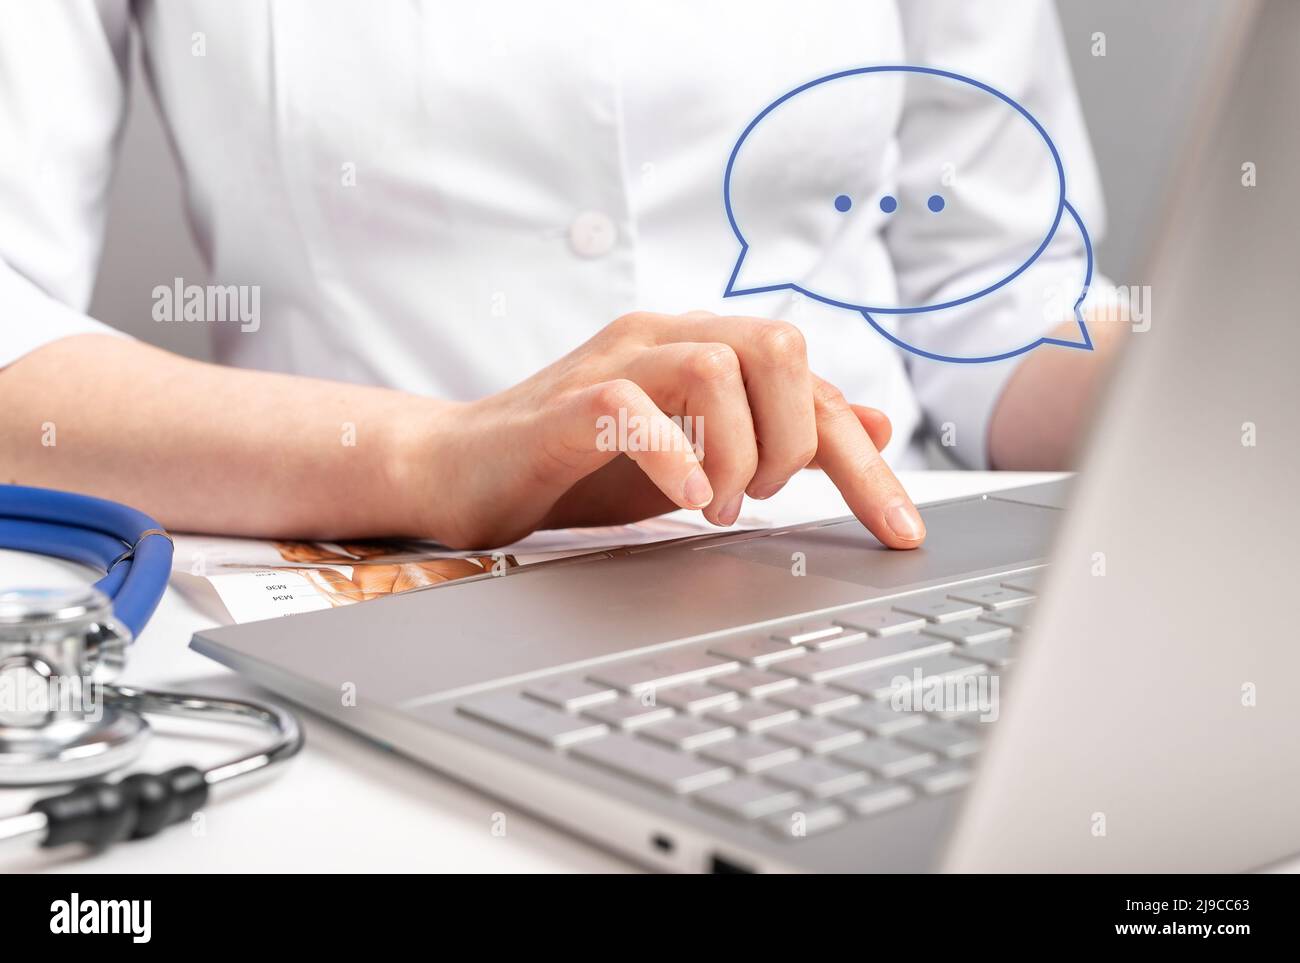 Medical online consultation. Doctor chatting, typing answers to patient about health concerns. Remote diagnostics and treatment concept. Using remote computer technologies in clinic. photo Stock Photo